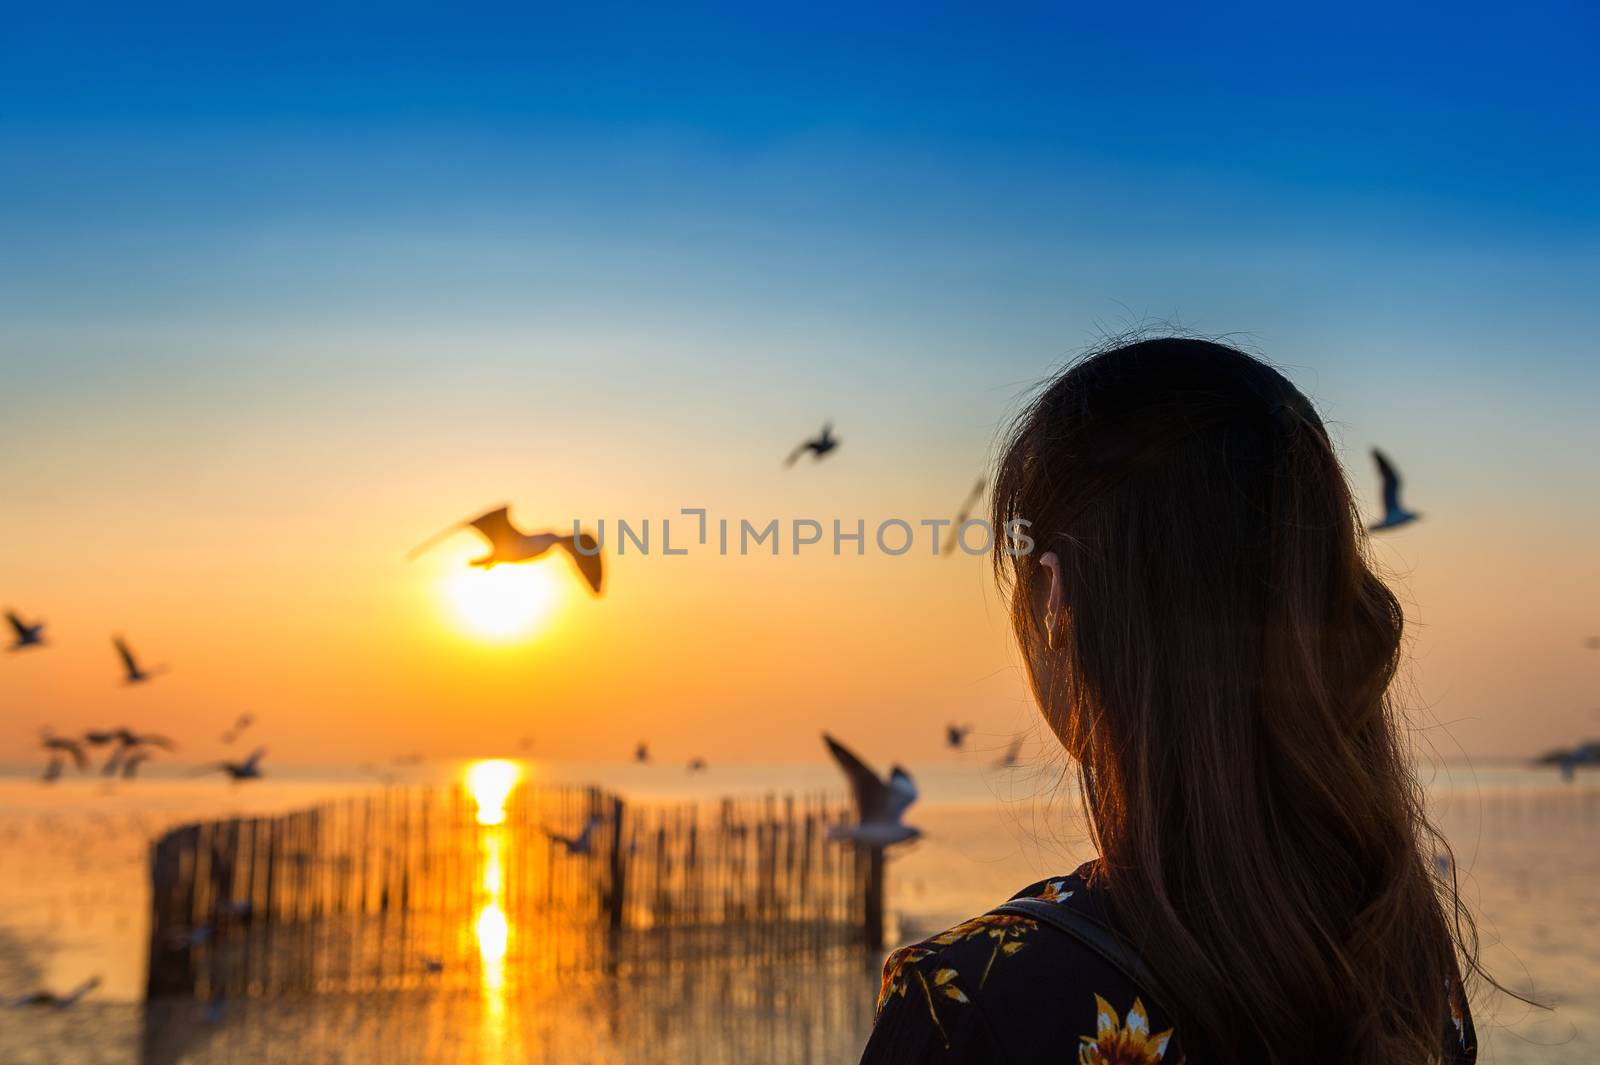 Silhoutte of birds flying and young woman at sunset.